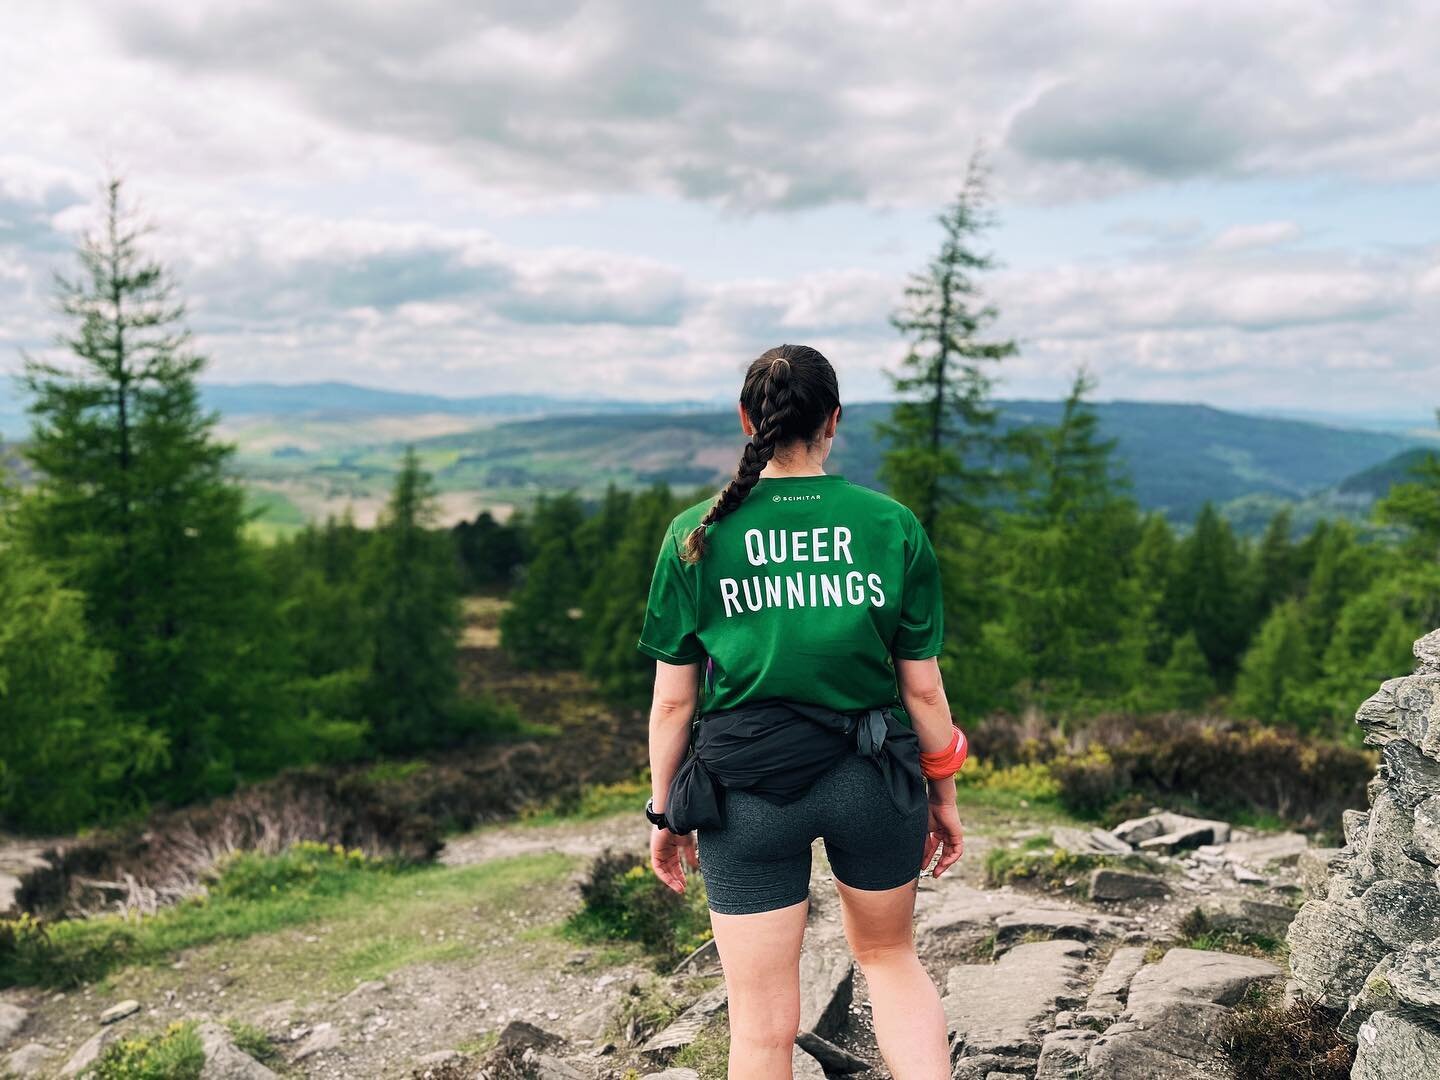 Here&rsquo;s a photo of Marie, repping Queer Runnings on King&rsquo;s Seat, Dunkeld. 🌈⛰️🤩
.
I&rsquo;m going to be putting membership costs up at the end of the month so if you want join the club before that happens, head over to my website (link in